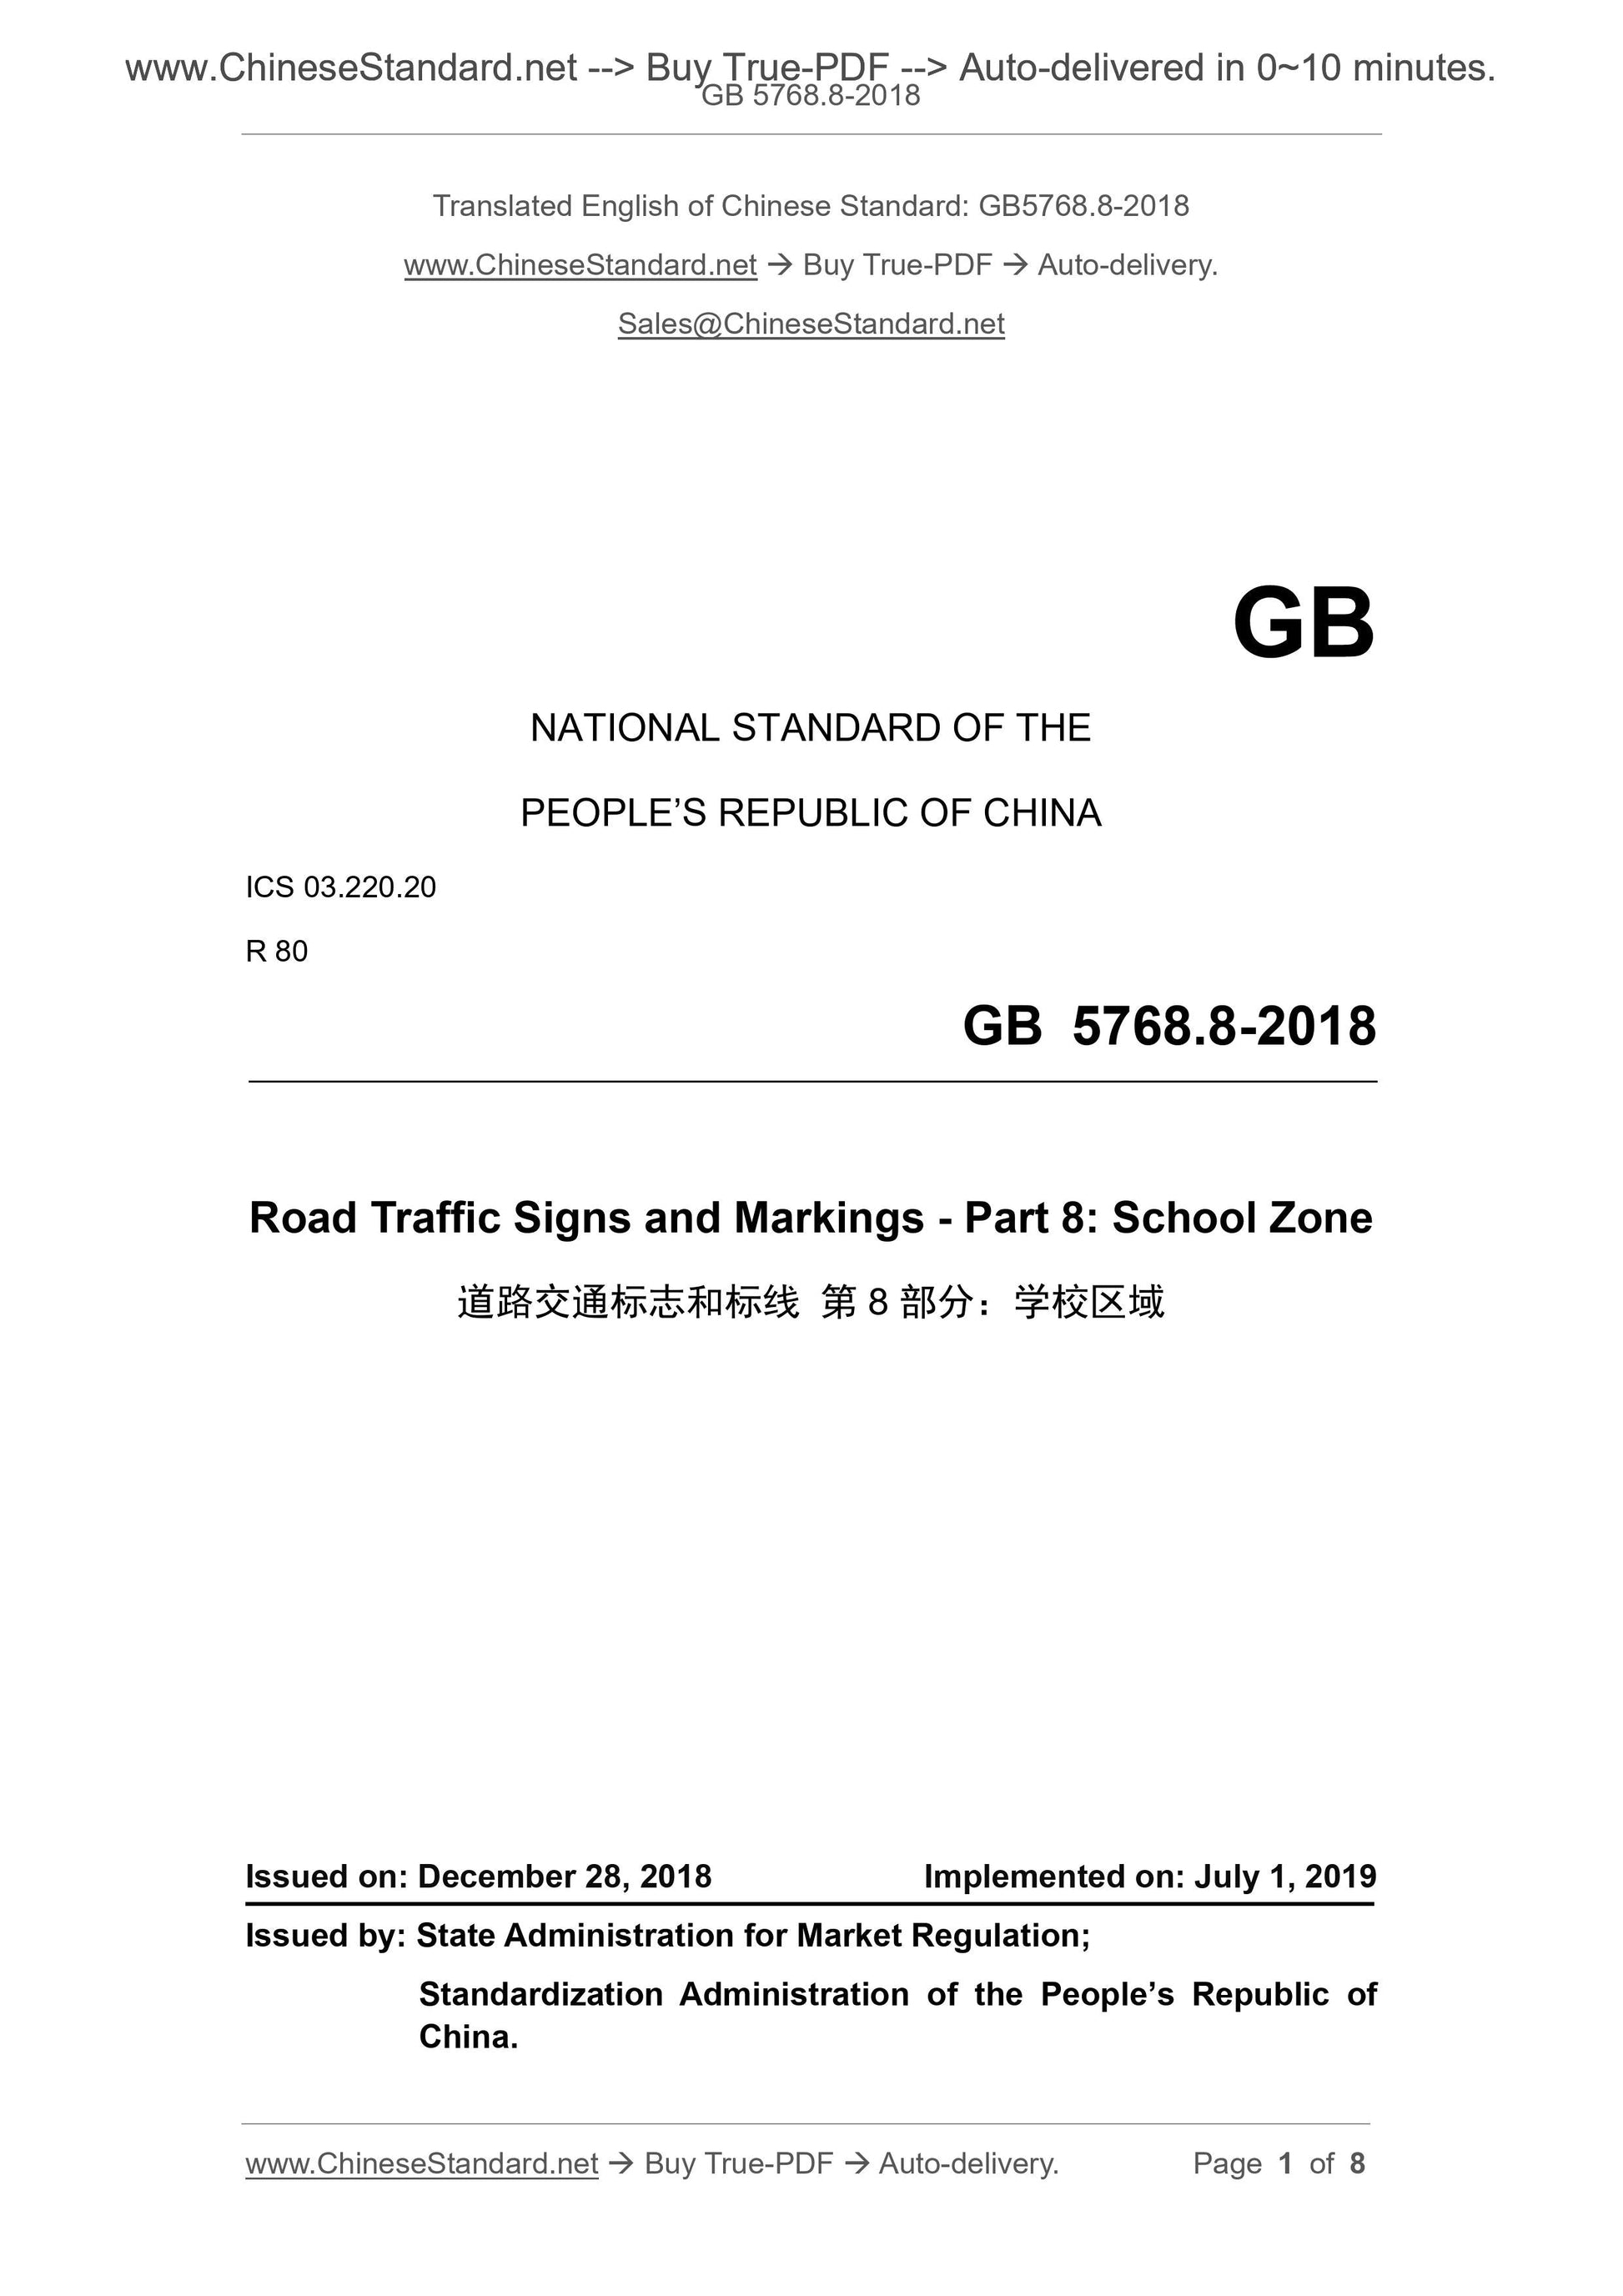 GB 5768.8-2018 Page 1